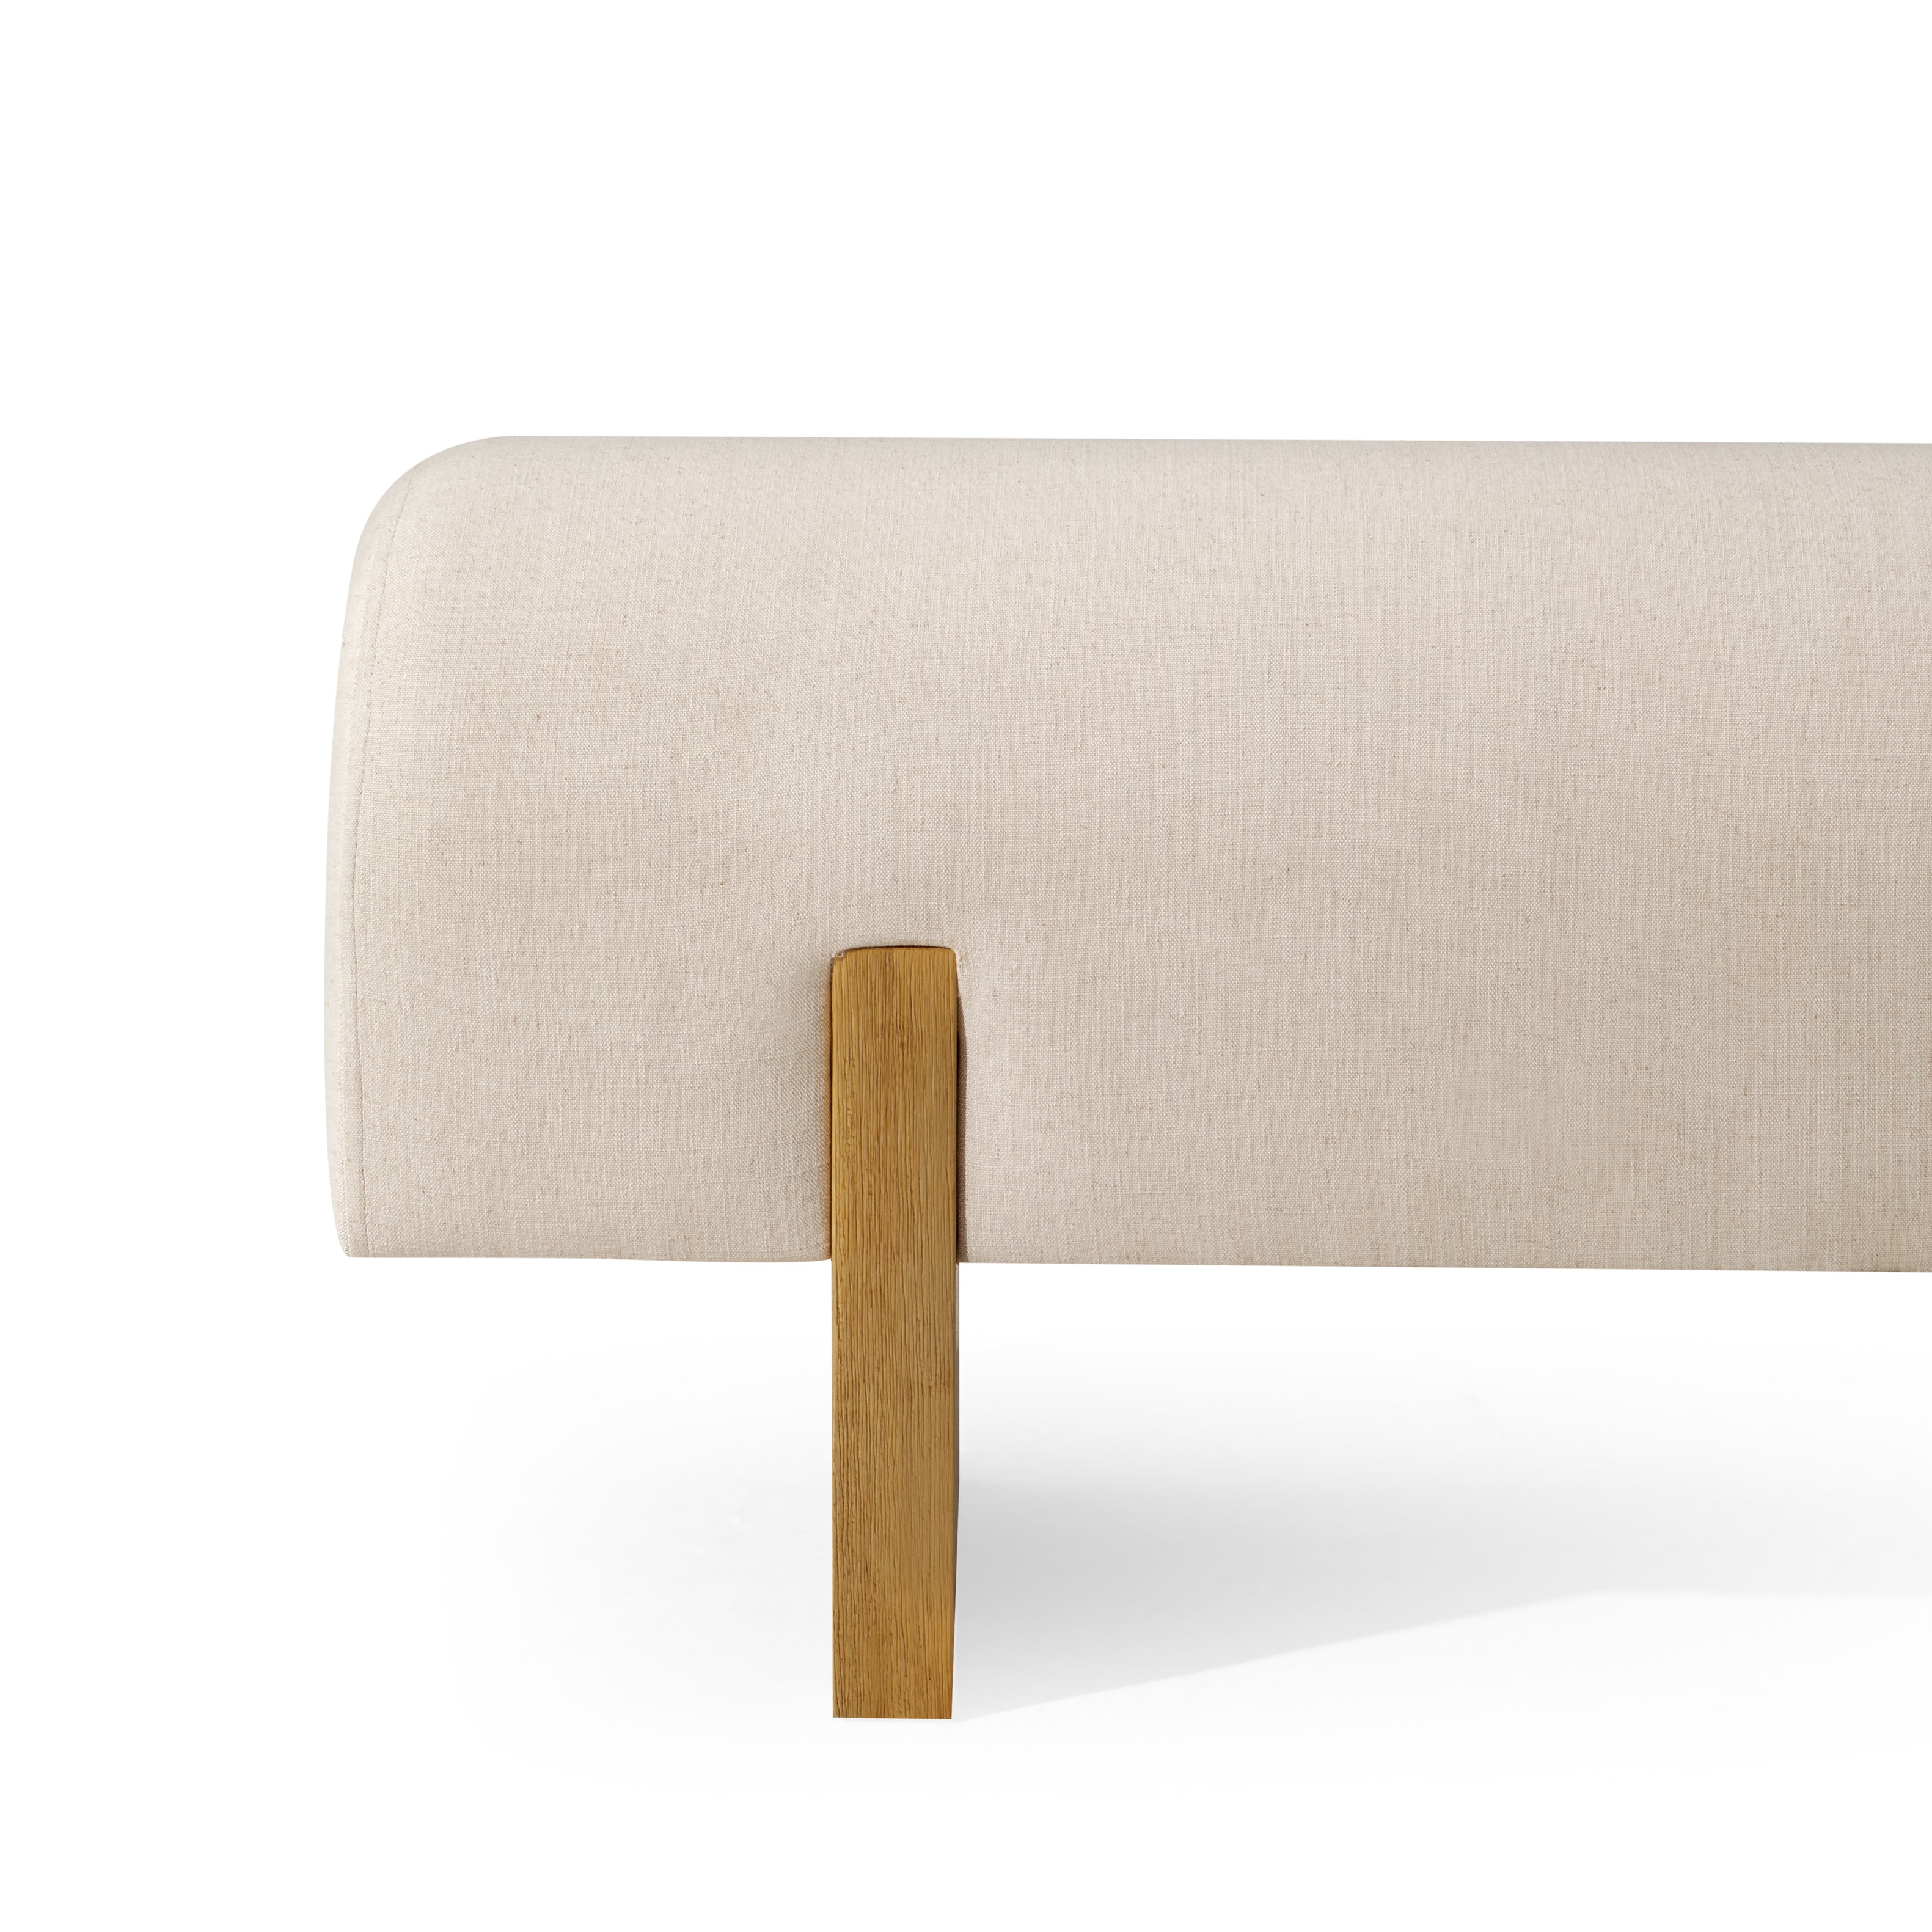 Juno Contemporary Upholstered Wooden Bench in Refined Natural Finish in Ottomans & Benches by Maven Lane